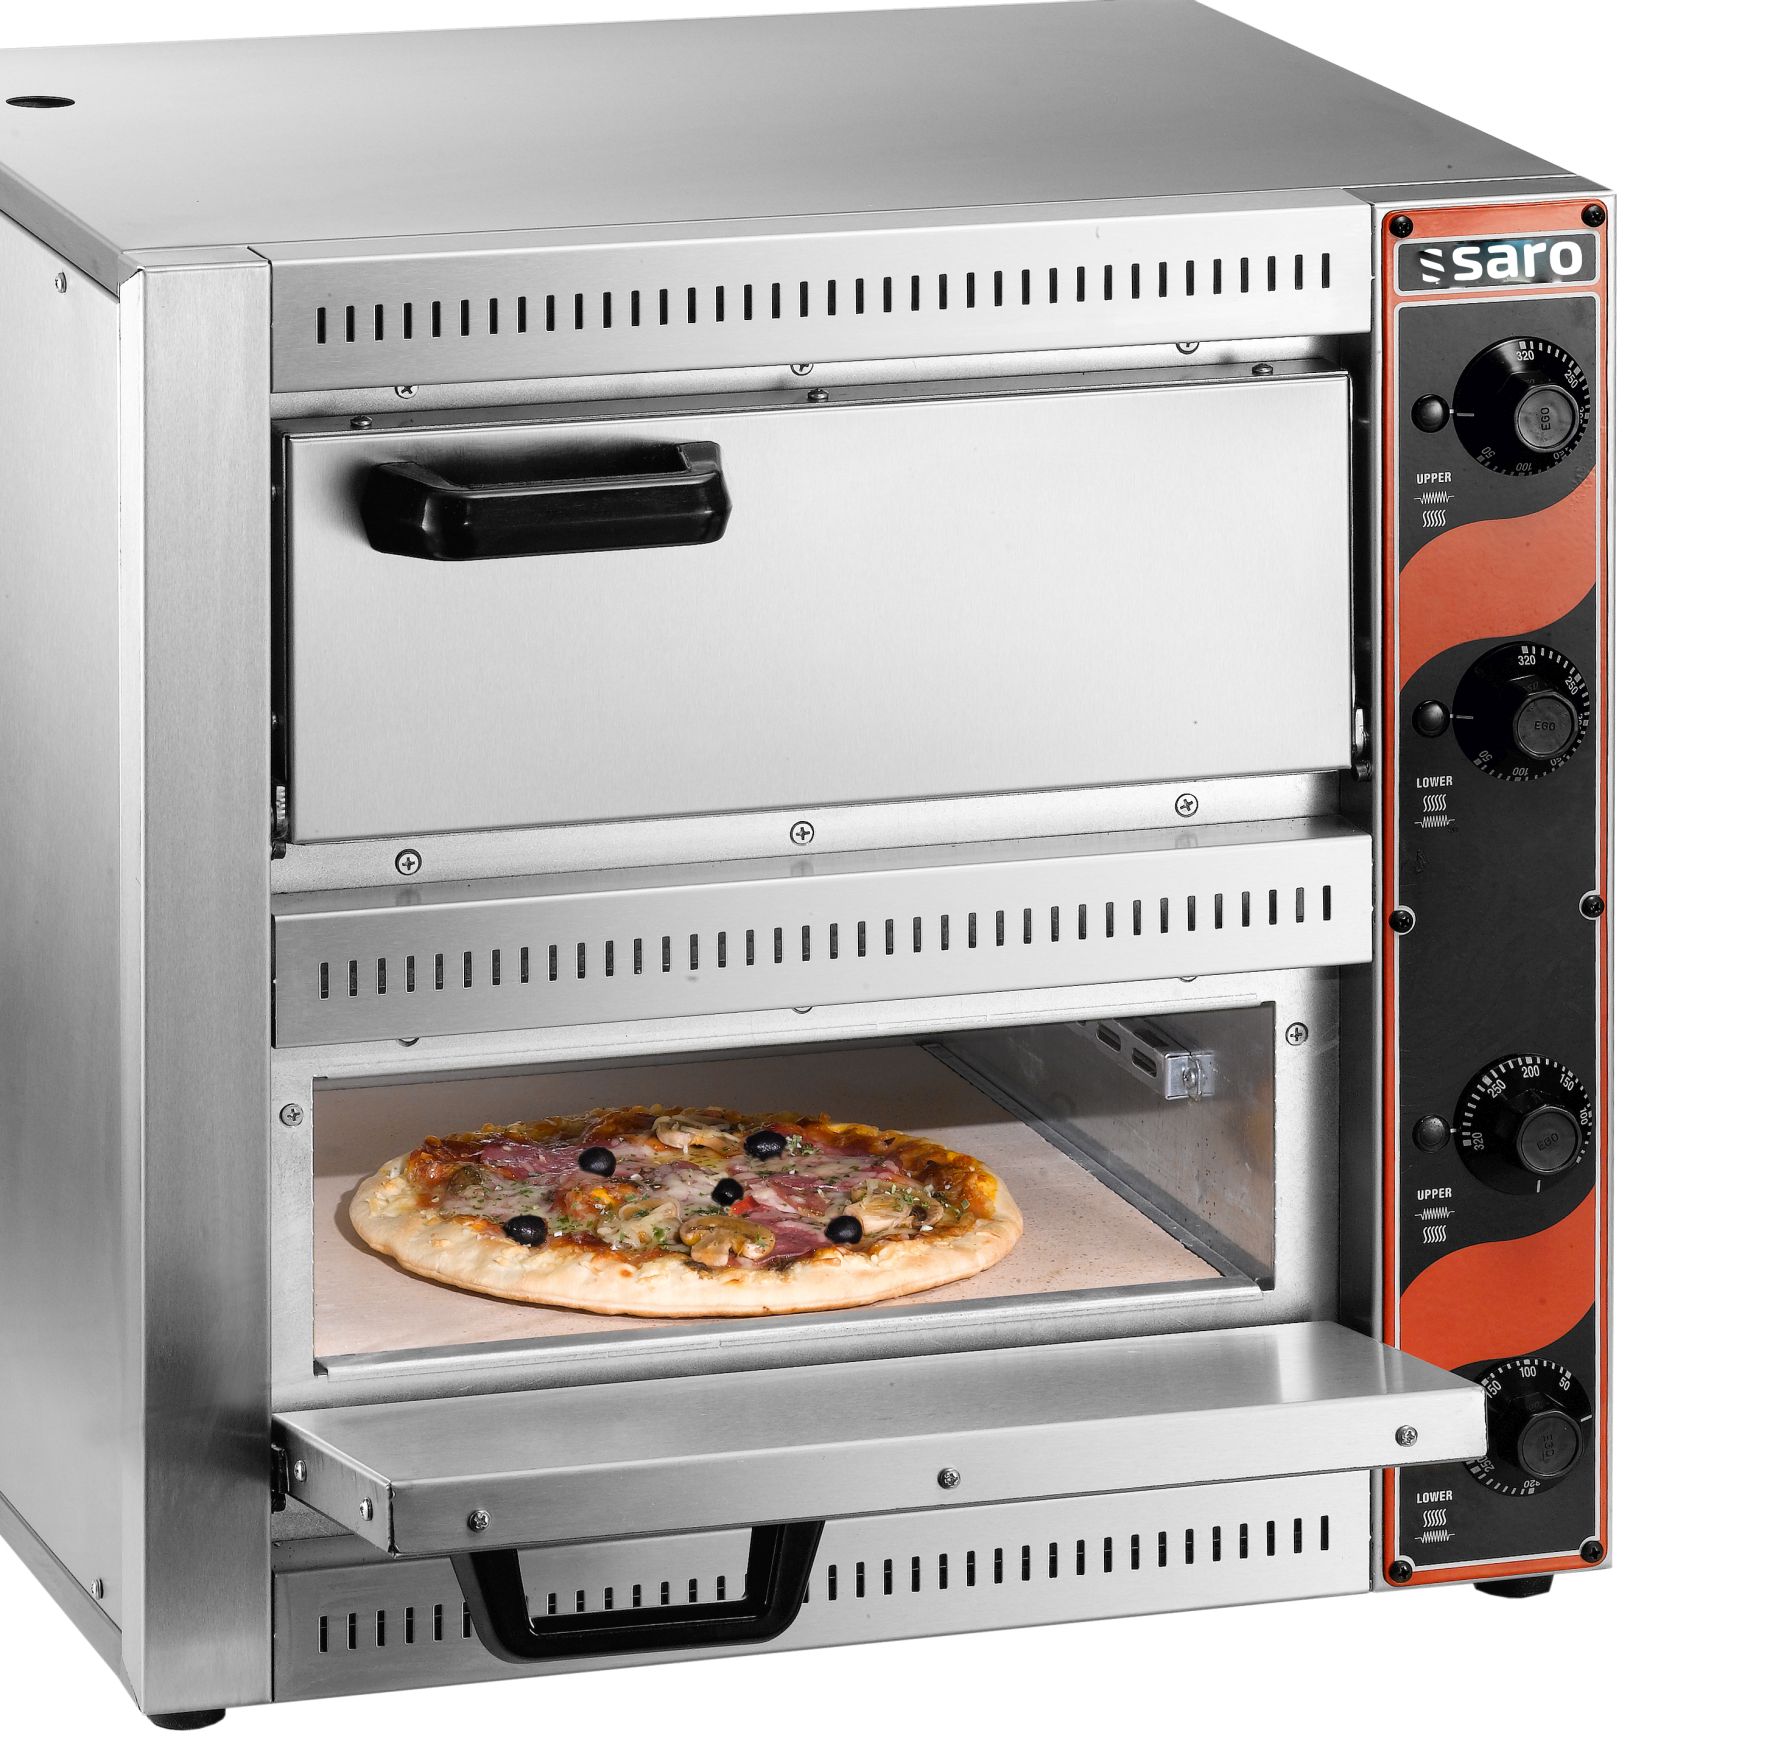 OVEN INSULATION MATERIALS IN KENYA (Pizza & Baking Ovens